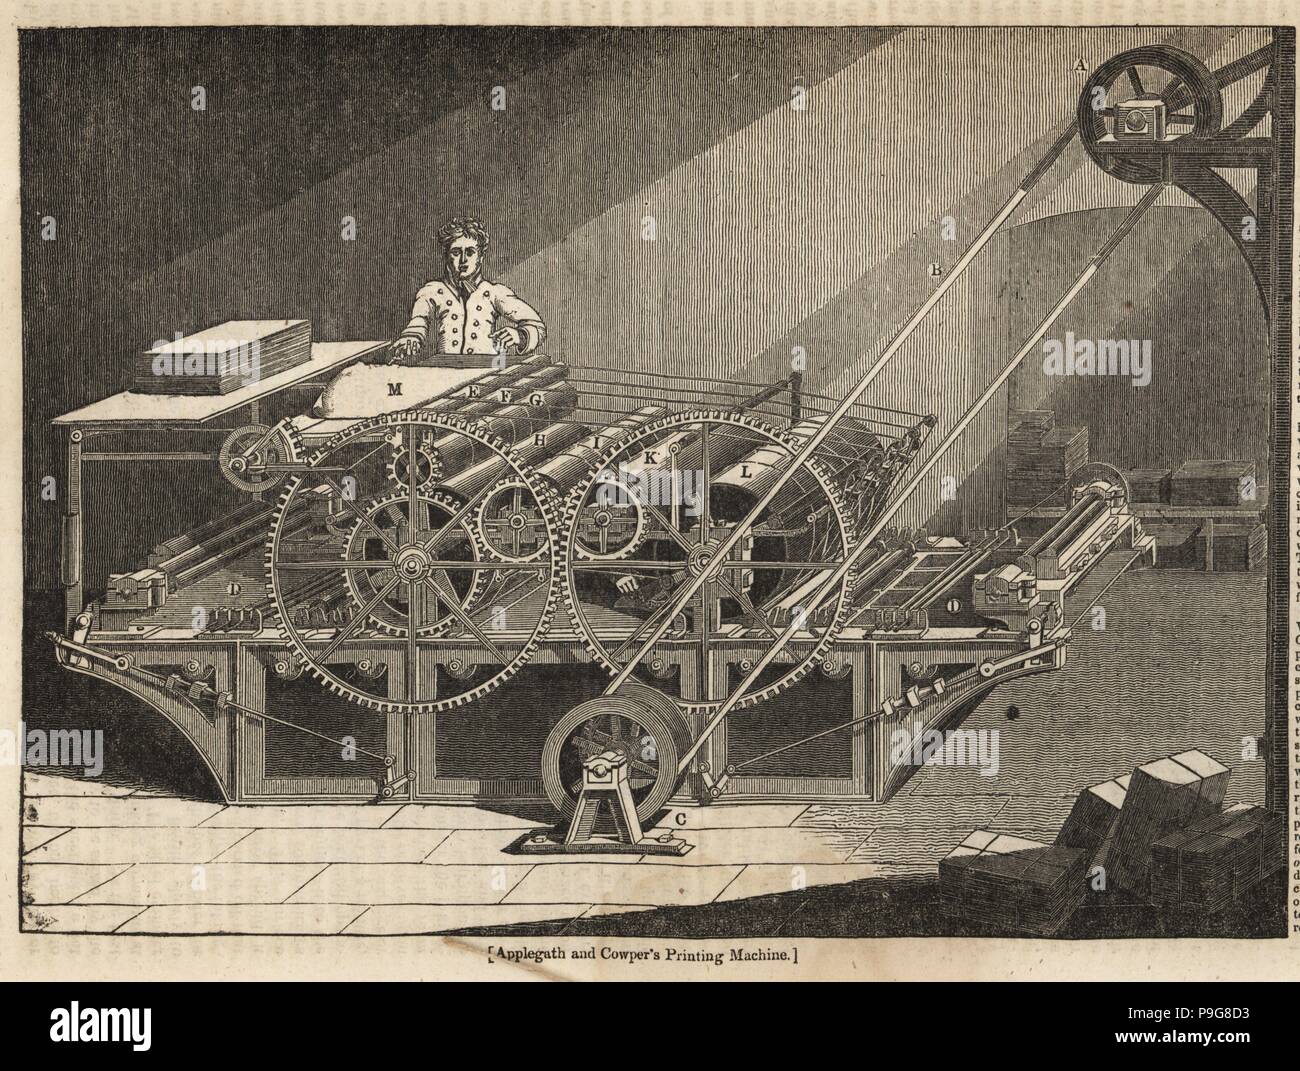 Augustus Applegath and Edward Cowper's printing machine. A boy inserts sheets of paper into the four-roller, 16-wheel printing machine capable of printing 5,000 sheets double-sided. Woodblock engraving from the Penny Magazine, Society for the Diffusion of Useful Knowledge, 1833. Stock Photo